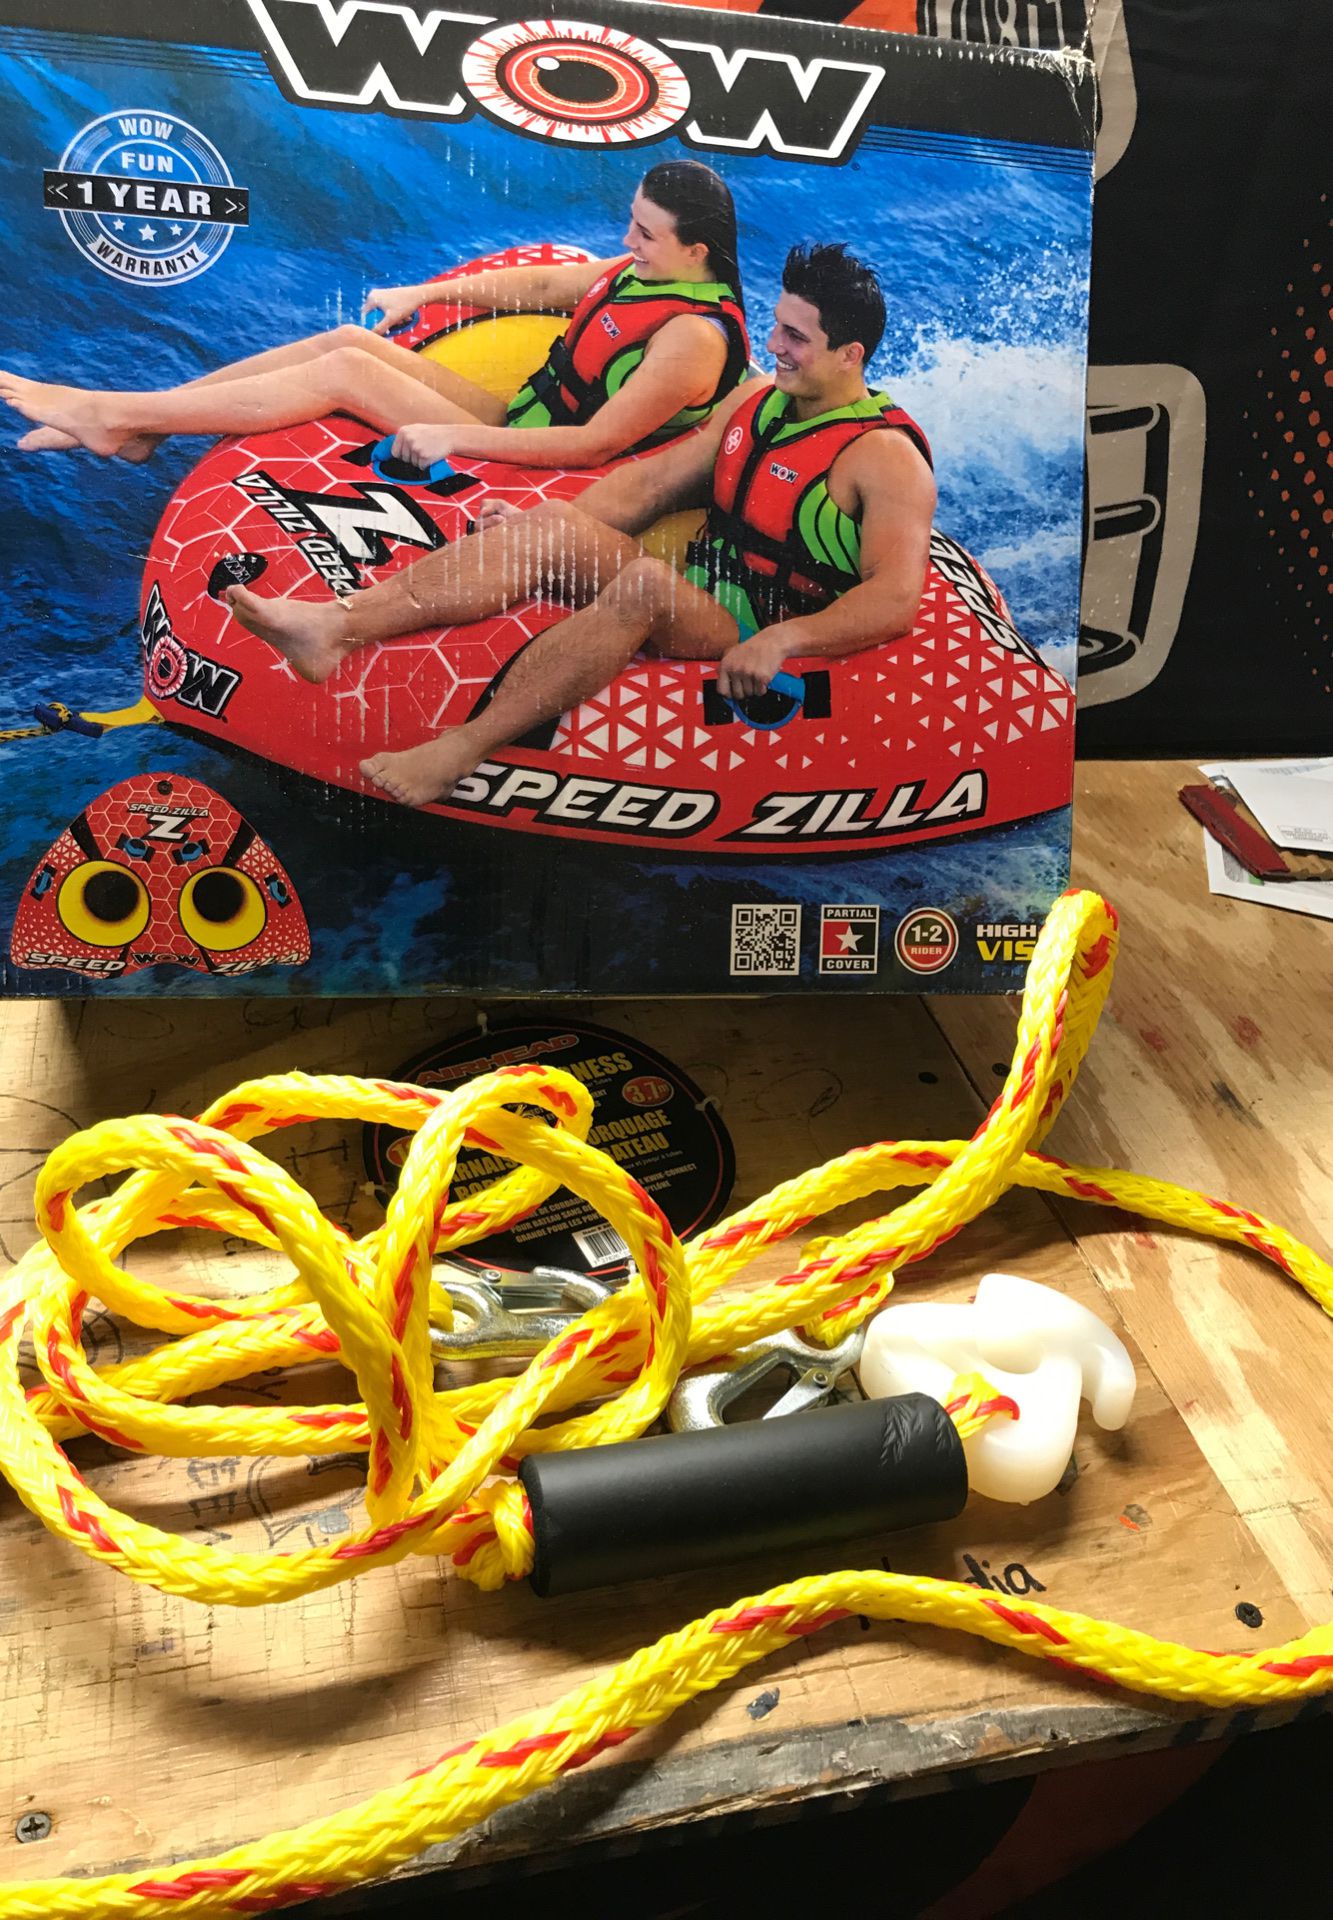 Wow boat speed Zola two person pull float rope to